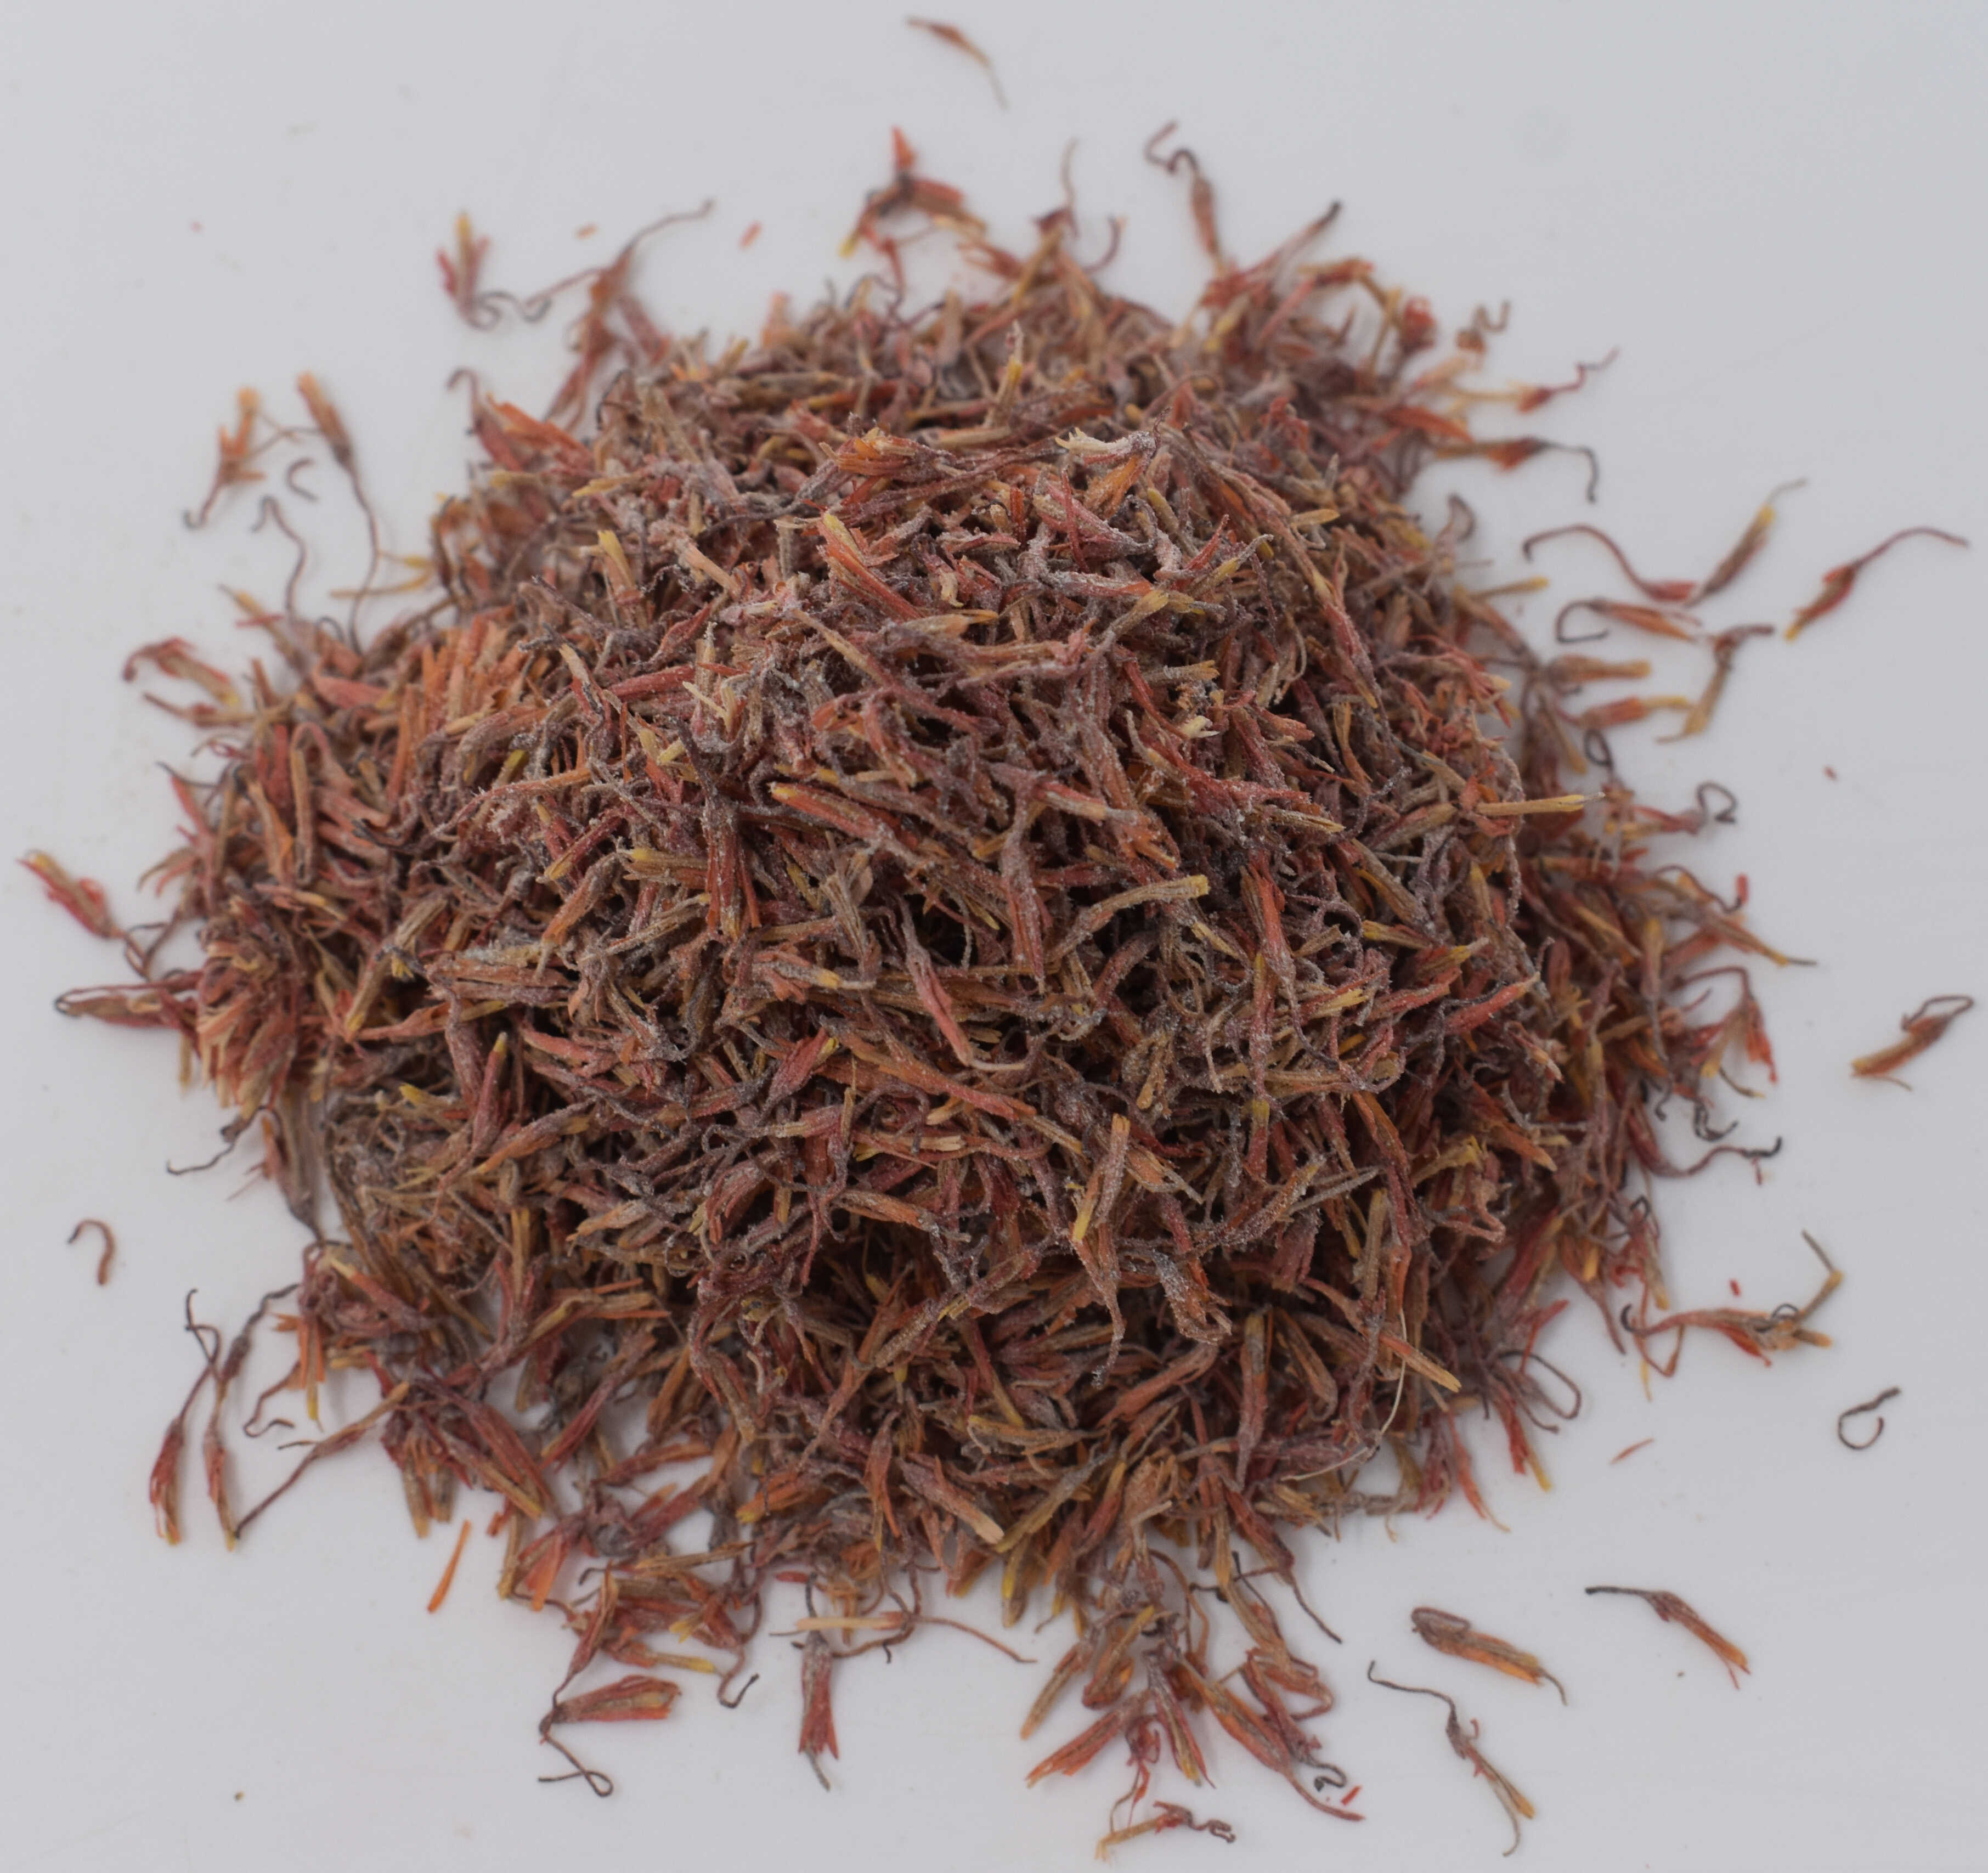 American Saffron and Slippery Elm - Top Photo